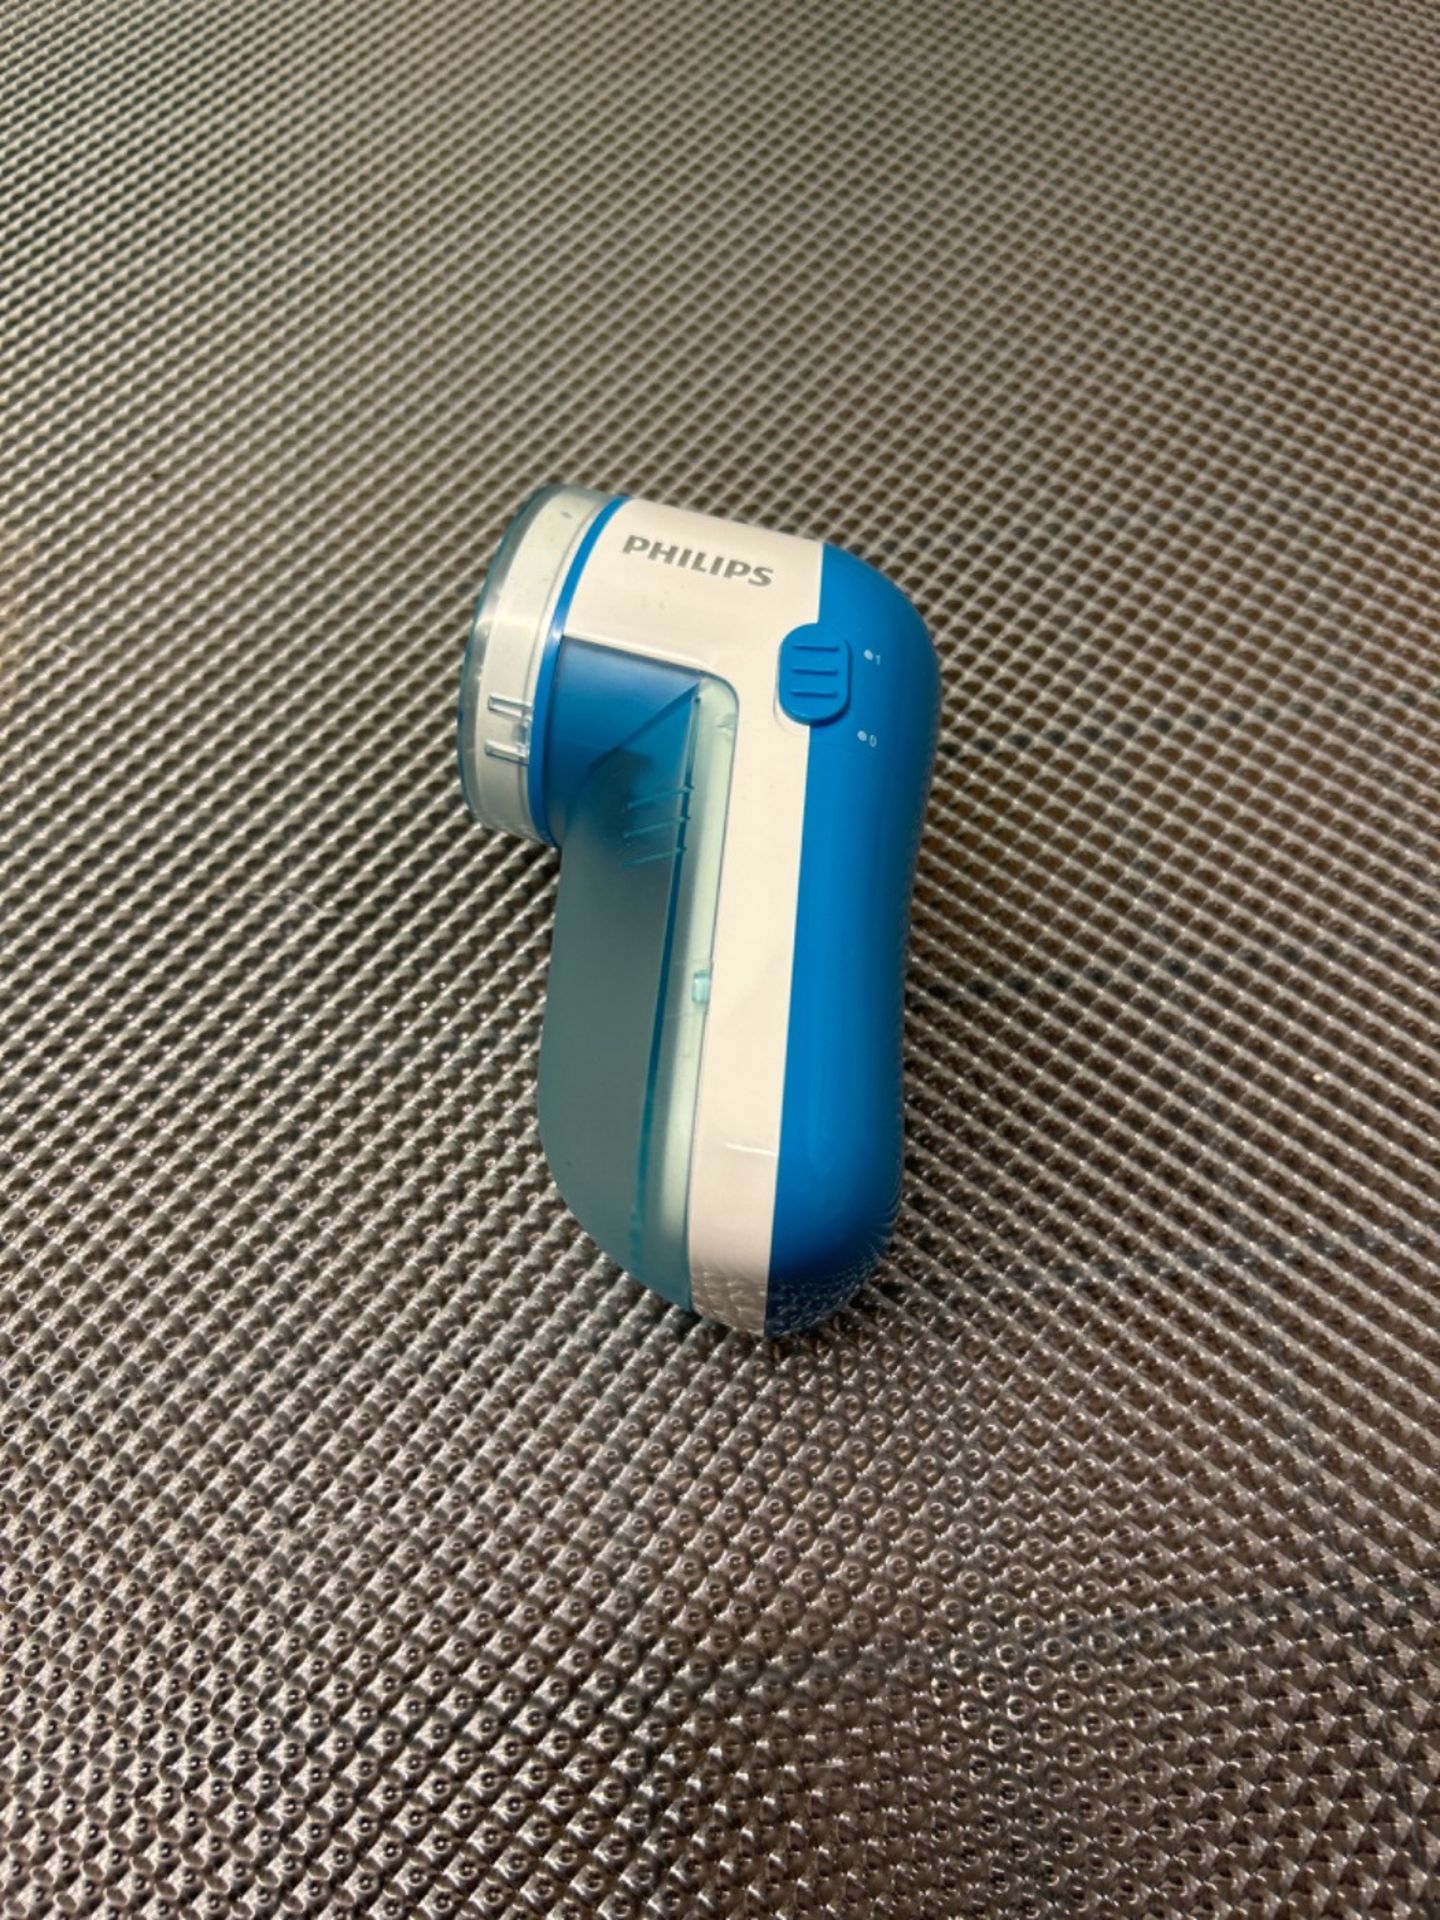 Philips Fabric Shaver GC026/00, Blue - Image 2 of 3